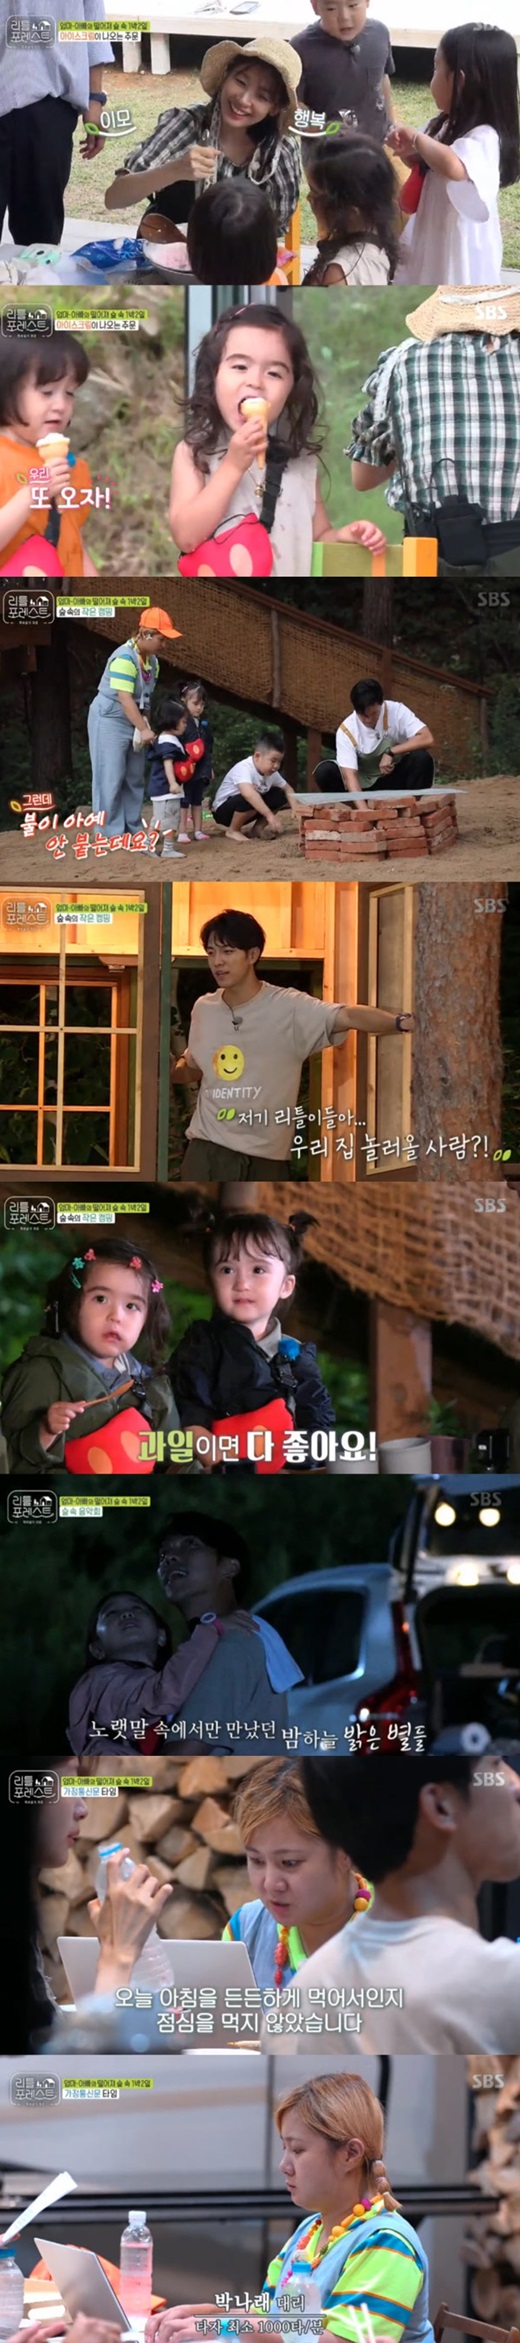 SBS Wall Street Arts Little Forest soared to 5.7% of the highest TV viewer ratings per minute.In Little Forest, which aired on the 9th, the first Camping of members and Little People was released.Prior to Camping, the members started to make Ice cream for Little, and Little, who watched the process of making Ice cream, was amazed and called two times cheering and laughed.Later, Indian tents, the highlight of Camping, were installed under the leadership of Lee Seung-gi and Park Na-rae.Little fell in love with the monster play in the tent, and in this process Eugene stepped on the soil naturally.In the meantime, the members laughed at the appearance of Eugene, who had difficulty in stepping on the soil through soil play.In addition, Lee Seung-gi showed off his universal uncle aspect by baking meat following the tent.However, Lee Han-yi, who saw this, said, If you put meat together, it will not cook well.The members shared their roles and gave children a happy evening in nature.Especially, at the end of the camping, Lee Seung-gis proposal made the members and Little feel the night and sky of nature.Members sent a family letter to their childrens parents for the last time of the day.All the members sat around and carefully conveyed the childrens story of the day with the photos, and communicated with their parents in real time and talked.The scene rose to 5.7 percent of the highest TV viewer ratings per minute, taking the best one minute.Meanwhile, Little Forest, which was scheduled to air today (10th), will be released due to the Korea: Turkmenistan relay broadcast of the 2022 FIFA Qatar World Cup Second Qualifier Korea and will be broadcast at 10 p.m. on the 16th (Mon).